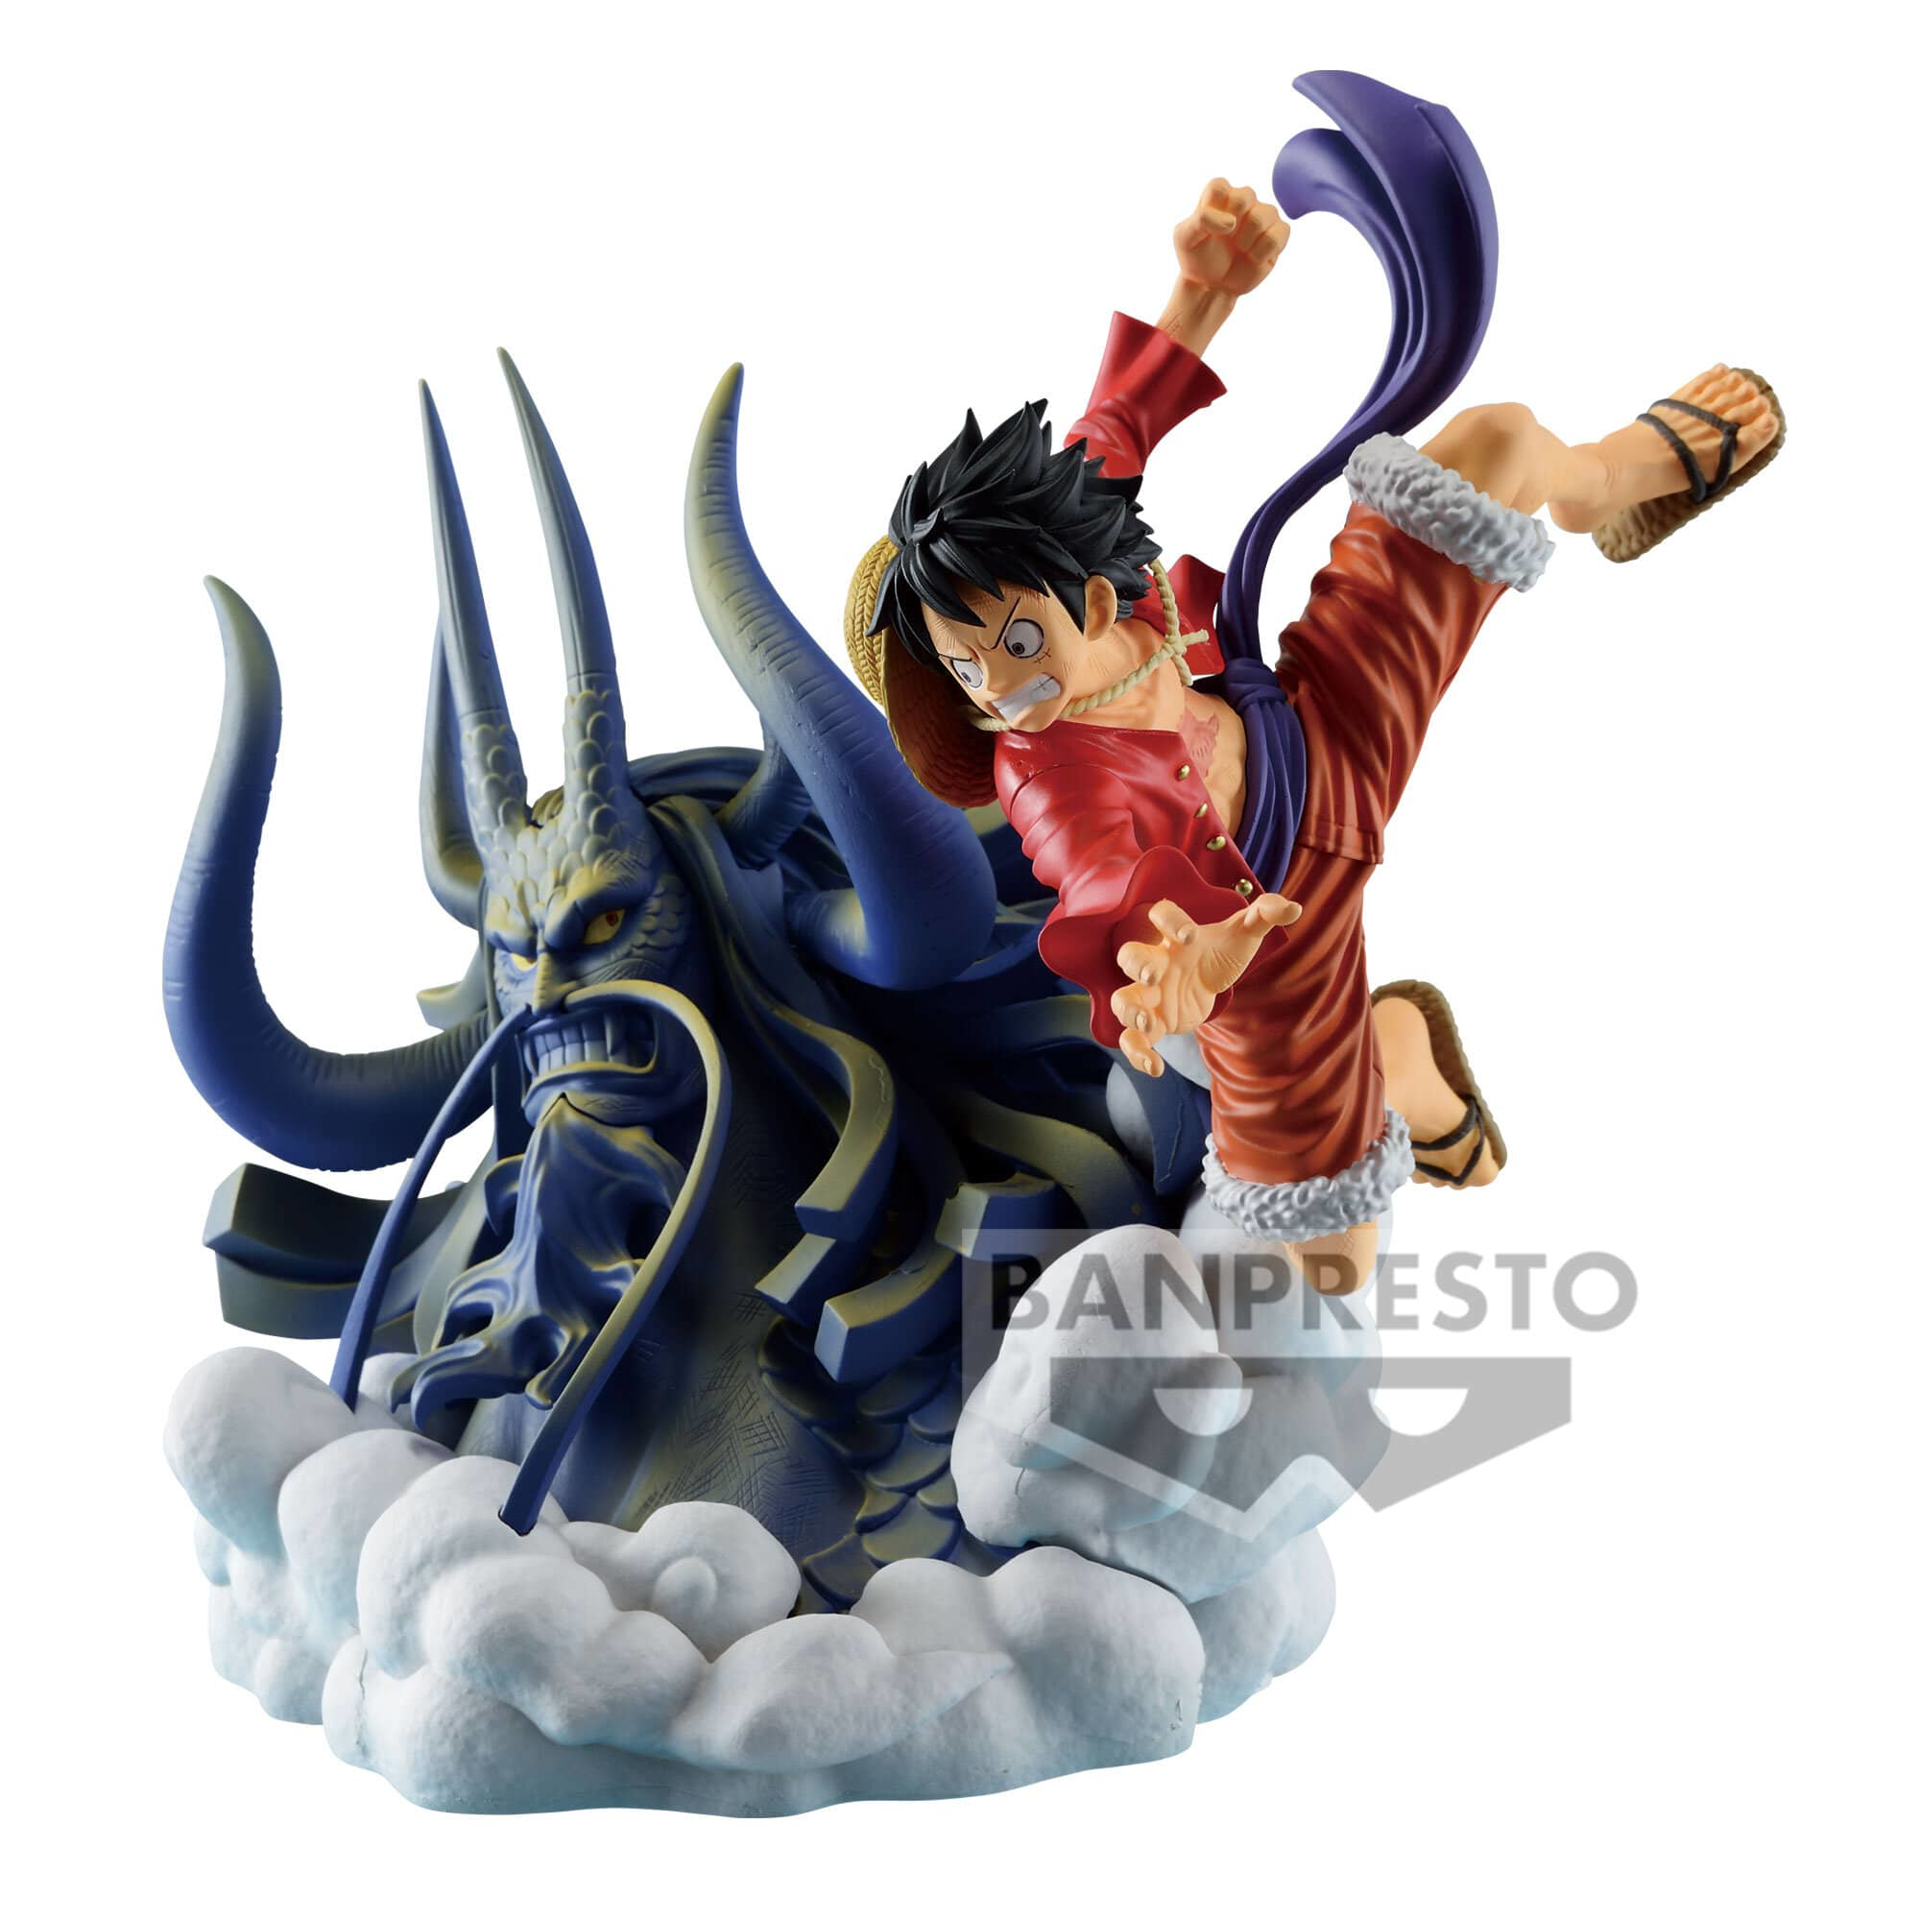 One Piece - Dioramatic [The Anime] - Monkey D.Luffy Statue 20cm